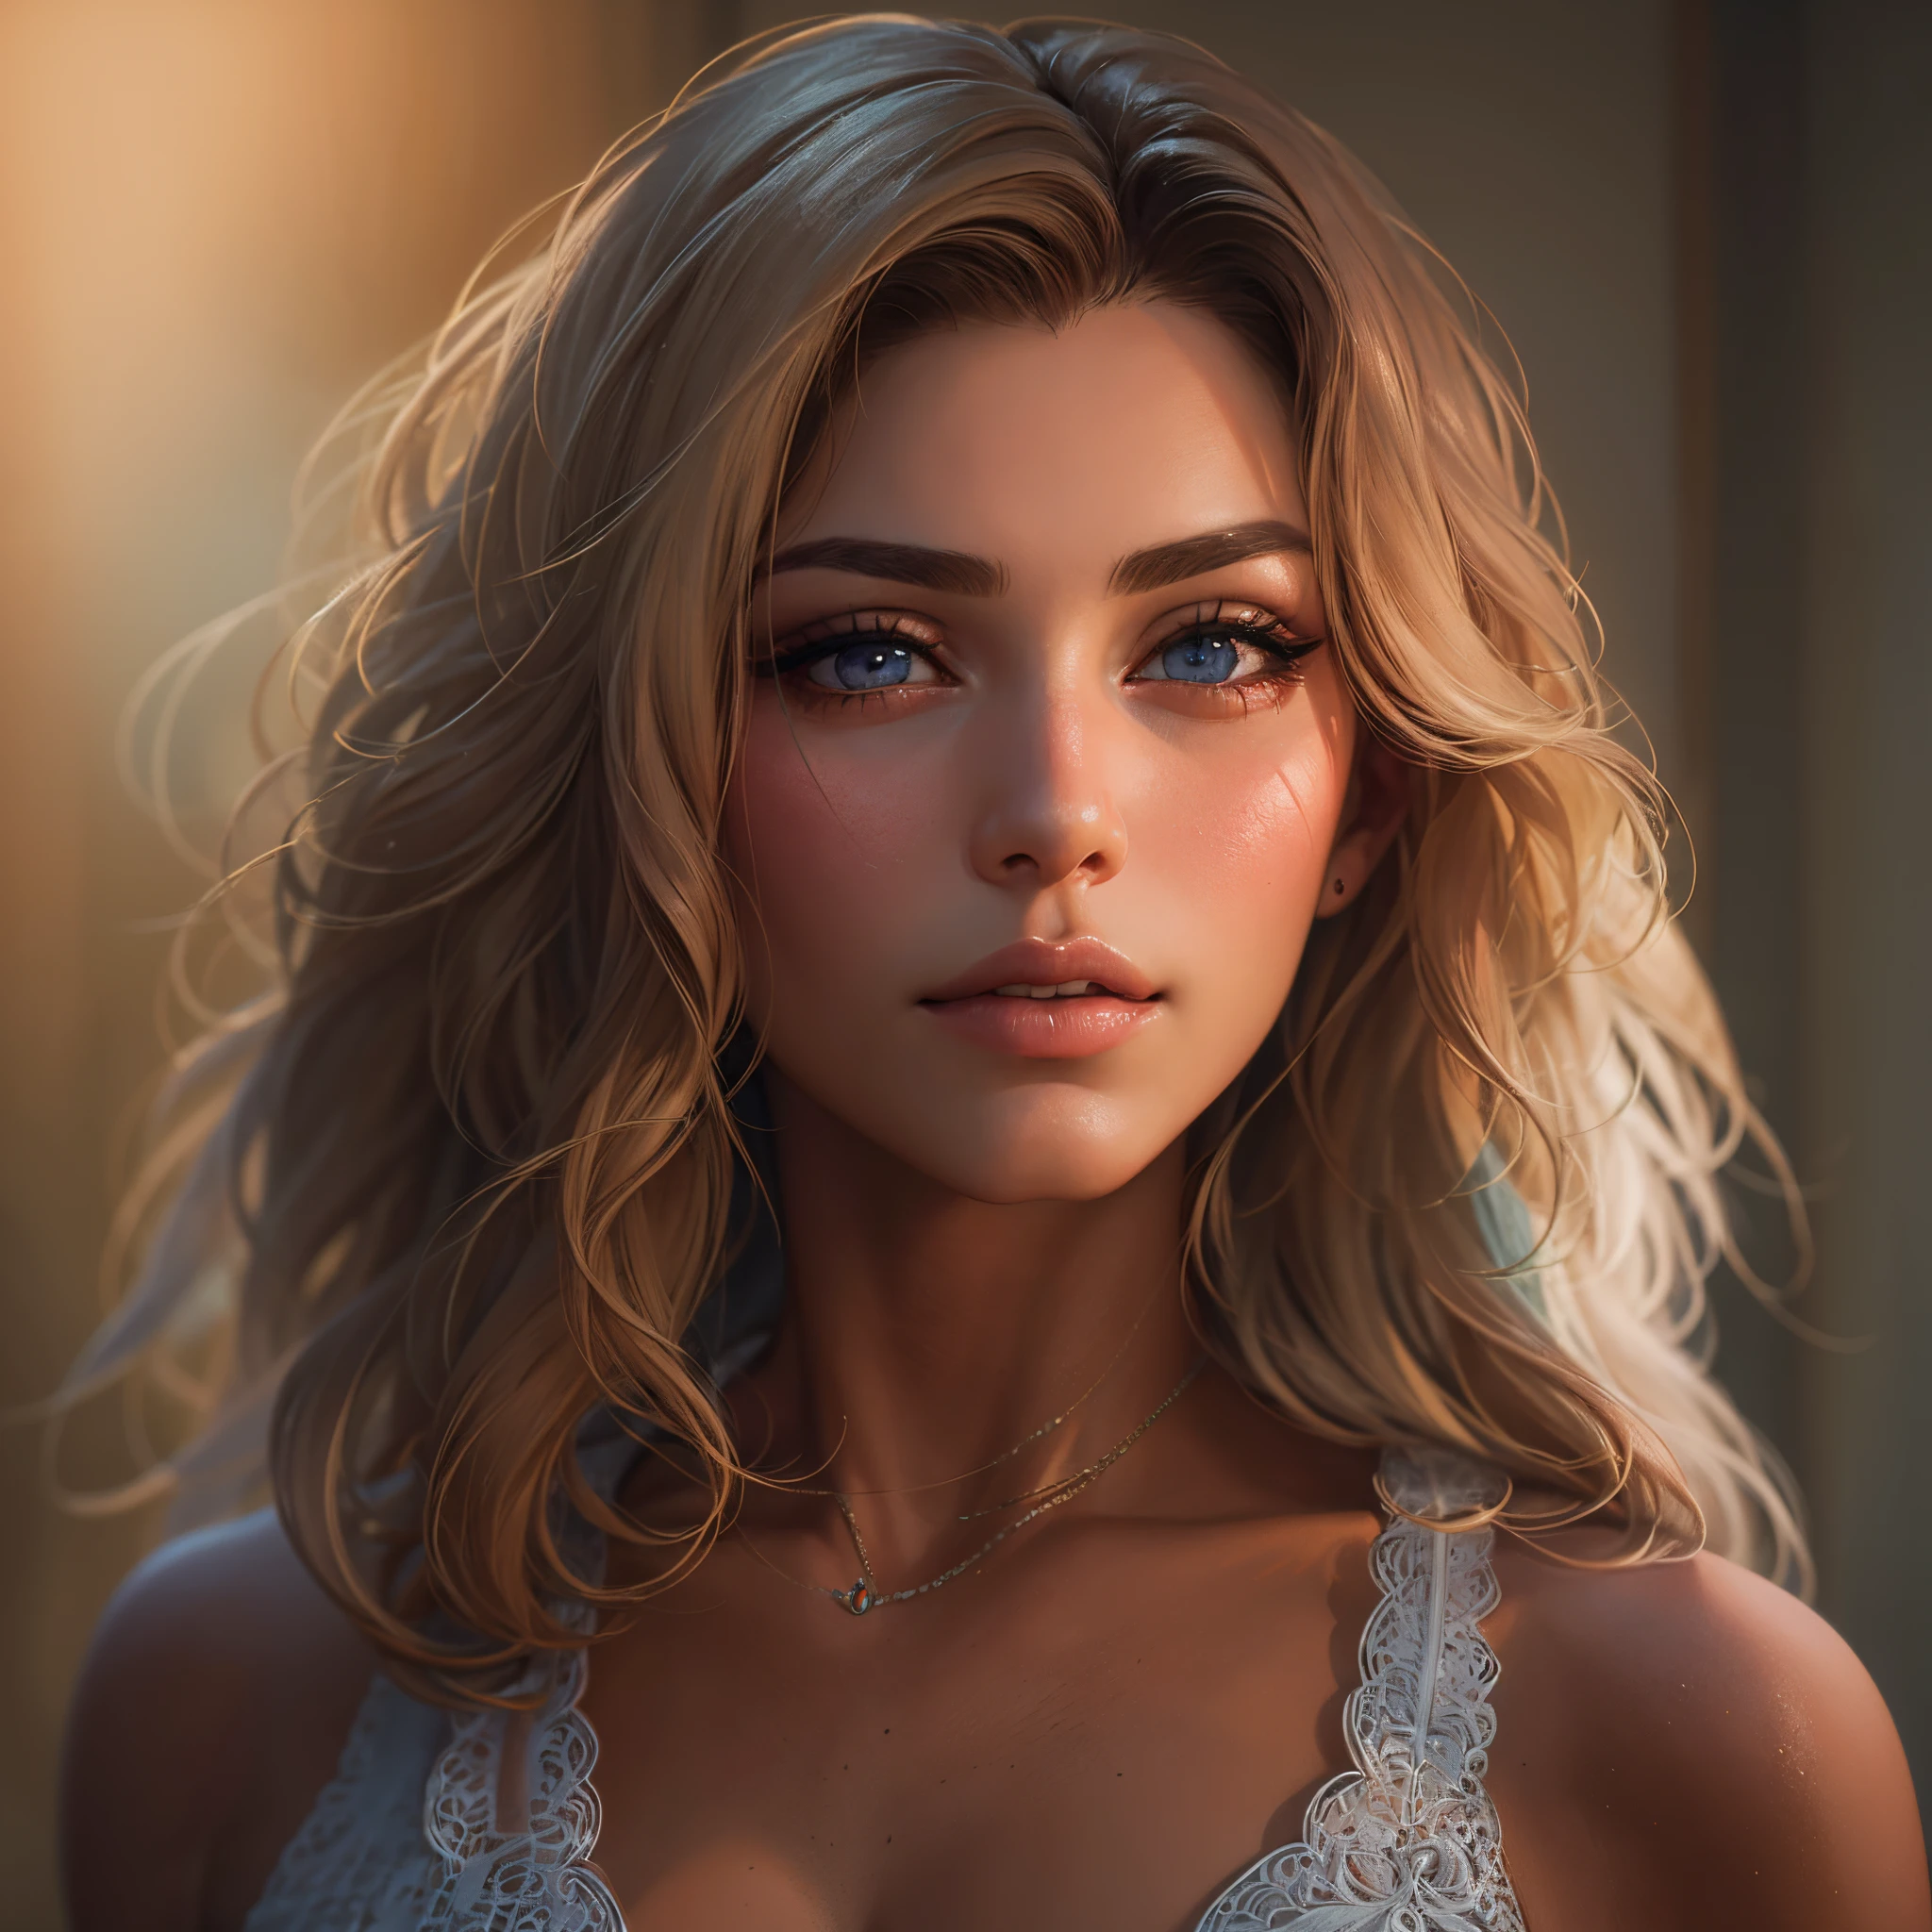 best quality,4k,8k,highres,masterpiece:1.2,ultra-detailed,realistic:1.37,portrait,female,beautiful,detailed eyes,beautiful detailed lips,extremely detailed eyes and face,long eyelashes,photo-realistic,fair skin,natural lighting,flowing hair,stylish fashion,confident pose,natural background,colorful,contrasting tones,candid expression,soft shadows,professional,modeling,studio lighting,vivid colors,subtle highlights,bokeh,crisp focus,high contrast,dynamic composition,professional model,Foto raw,RAW format photography